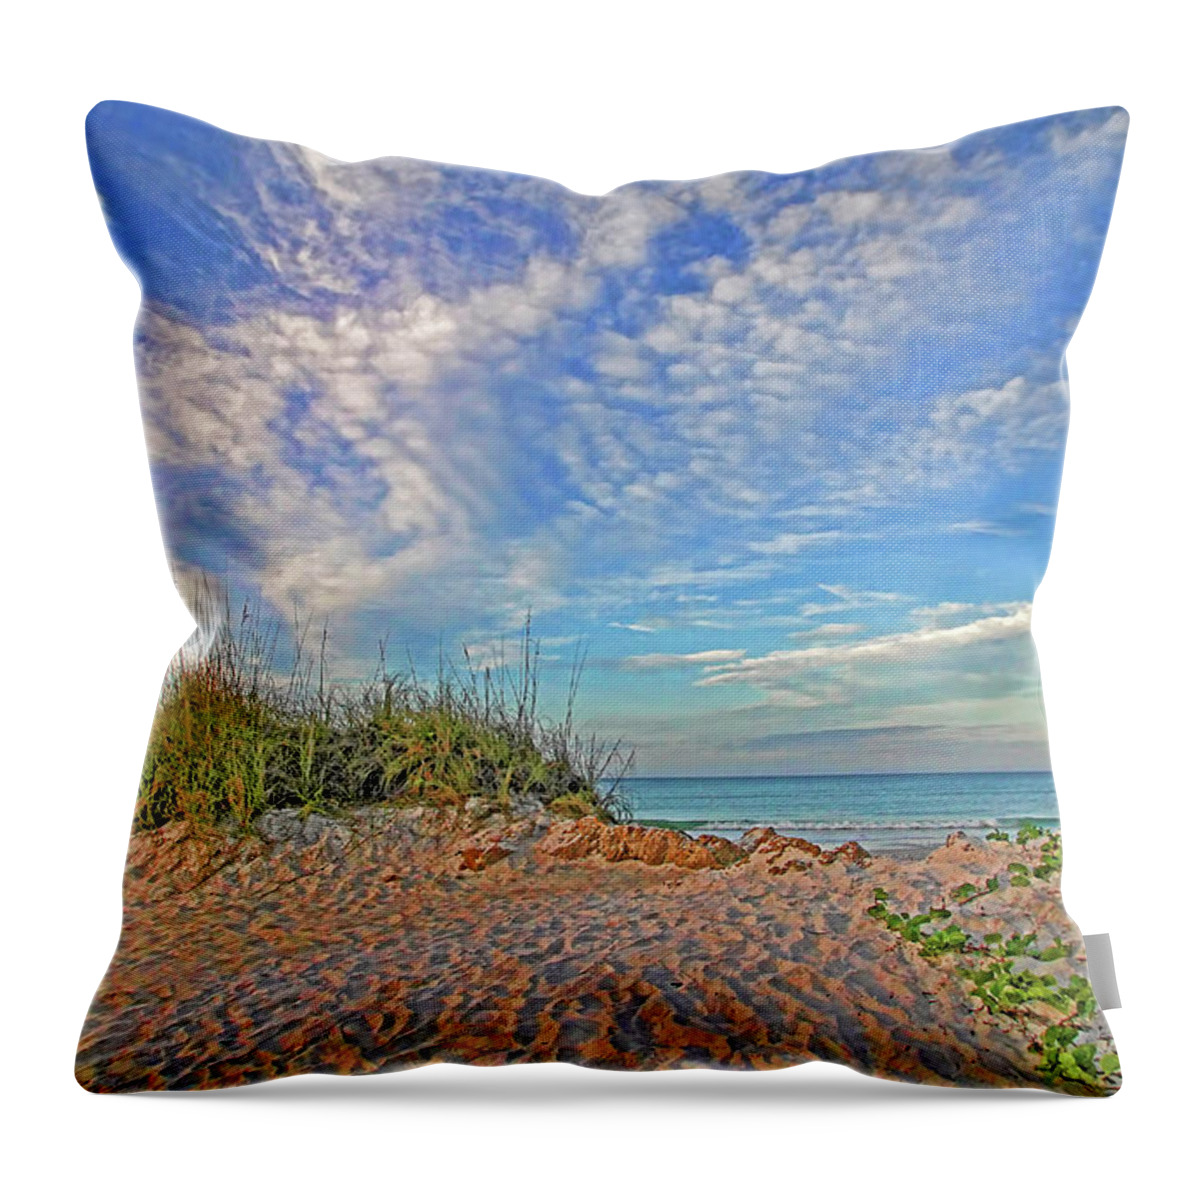 Beach Throw Pillow featuring the photograph An Invitation - Florida Seascape by HH Photography of Florida